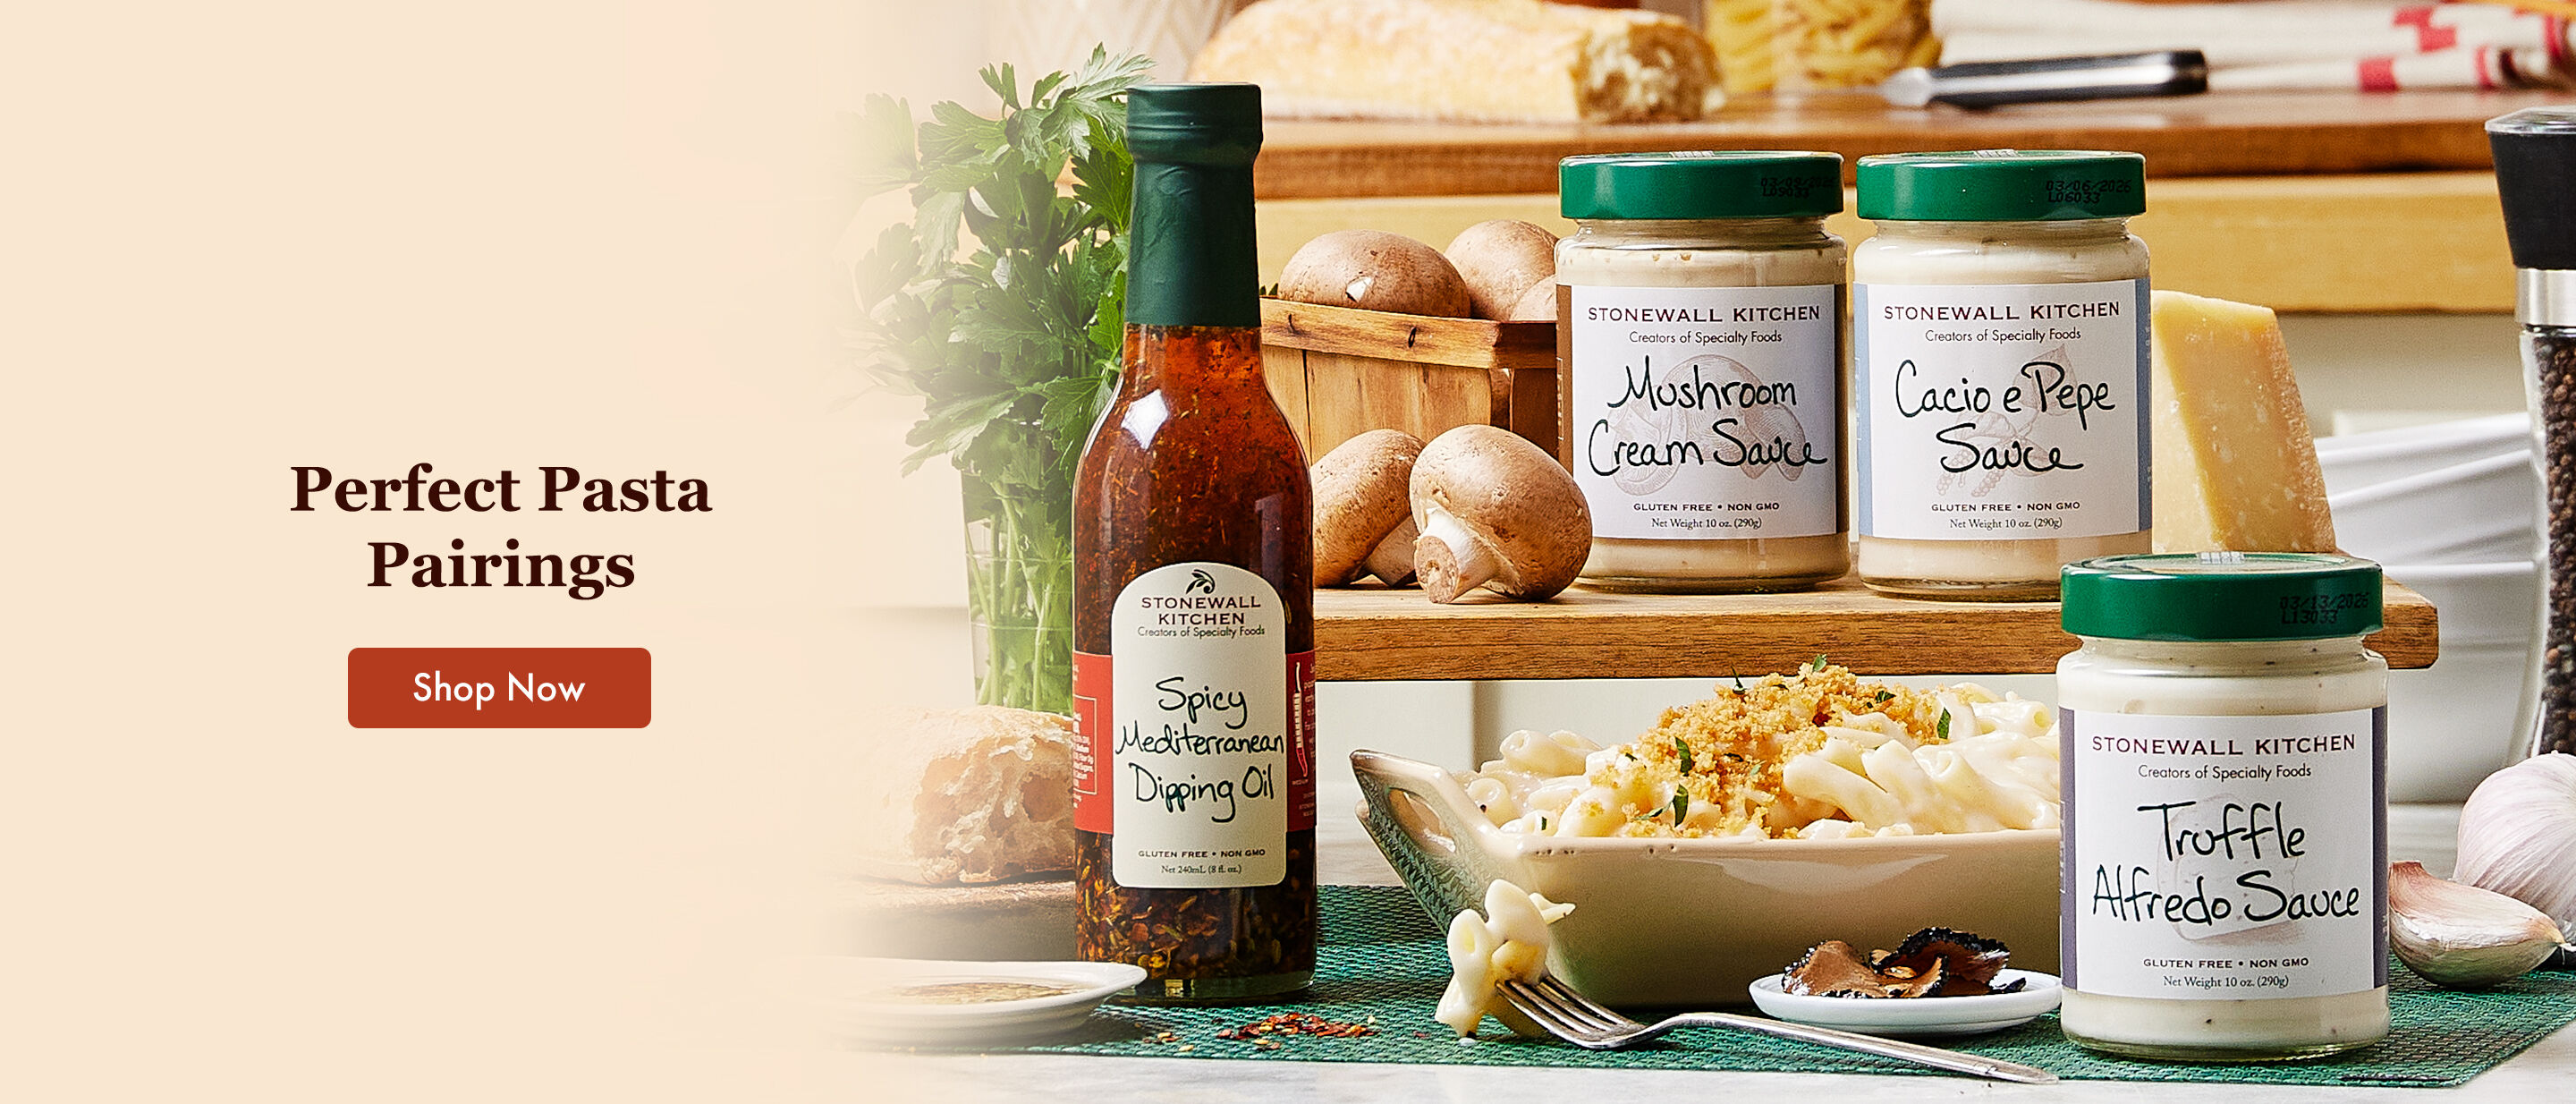 Perfect Pasta Pairings - Shop Now